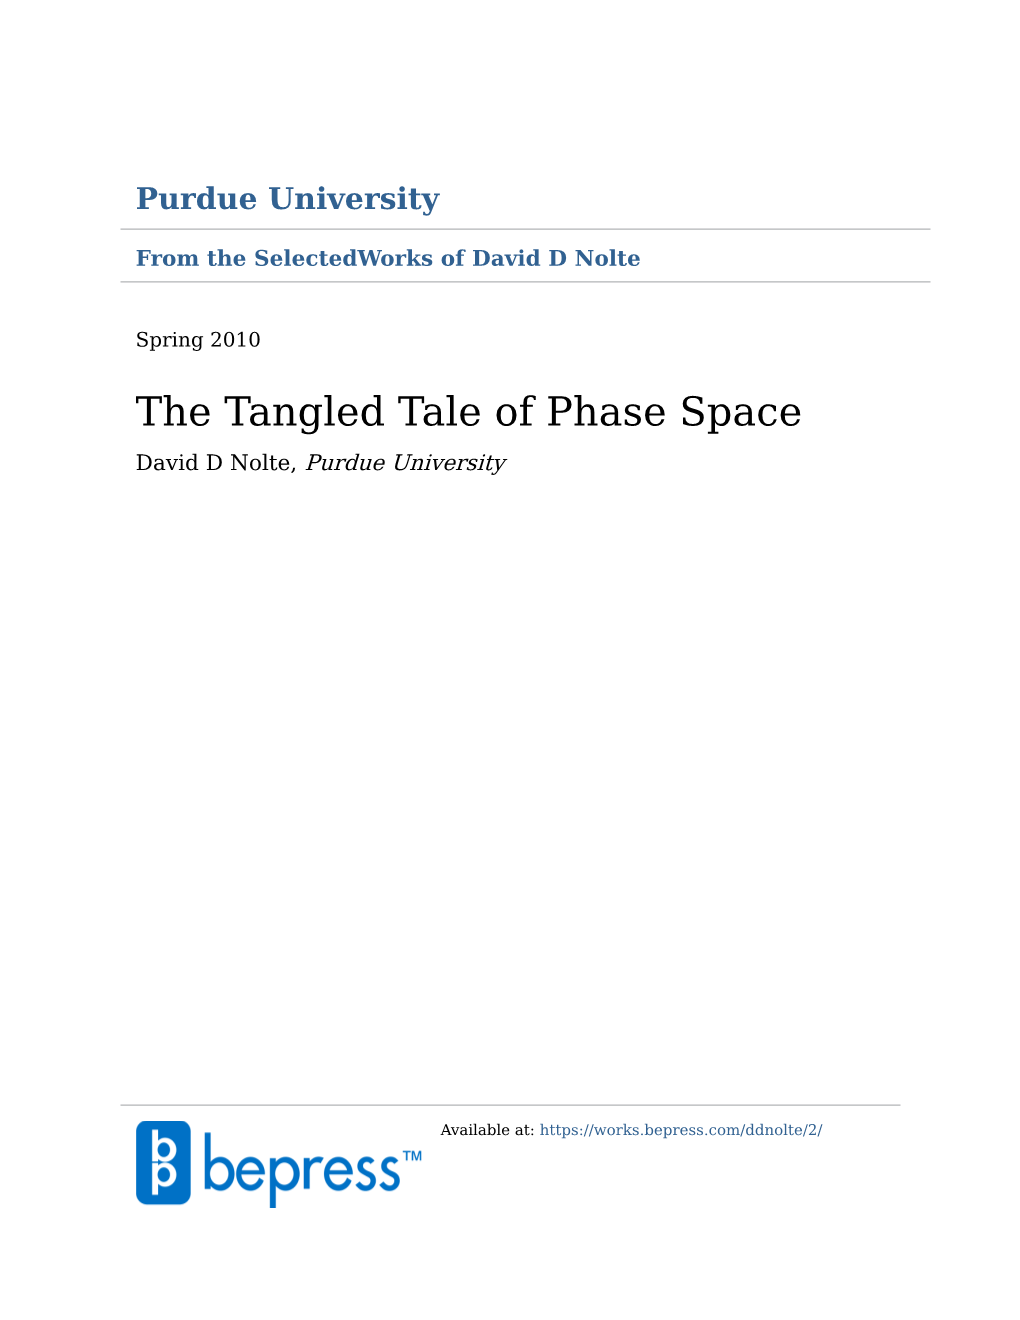 The Tangled Tale of Phase Space David D Nolte, Purdue University